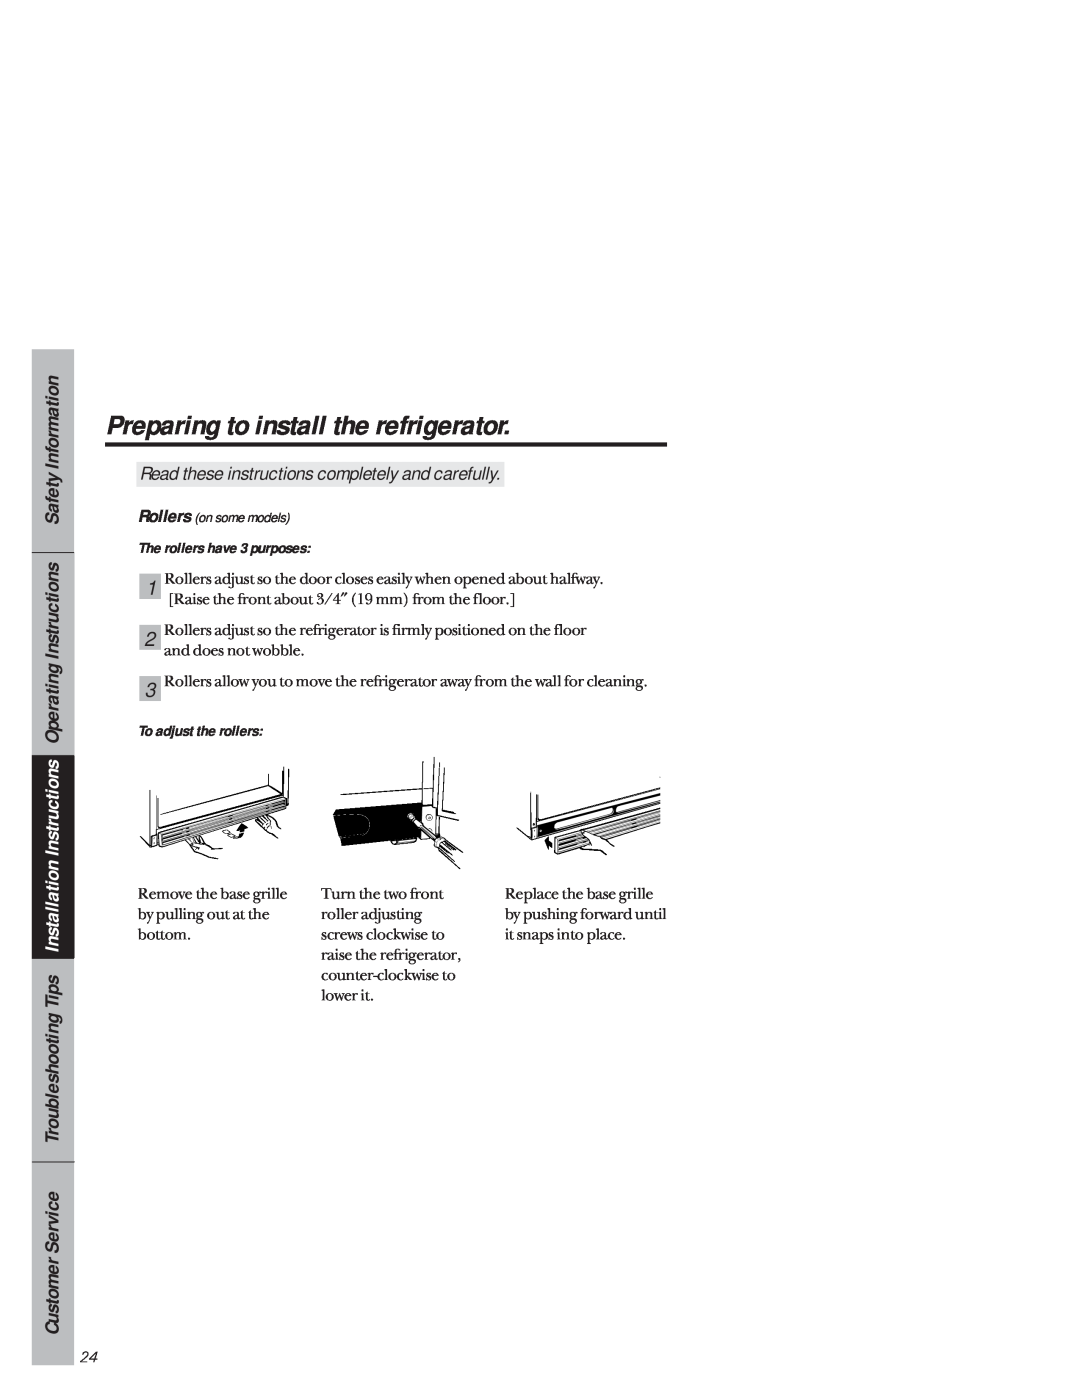 GE 1825 owner manual The rollers have 3 purposes, To adjust the rollers, Preparing to install the refrigerator 